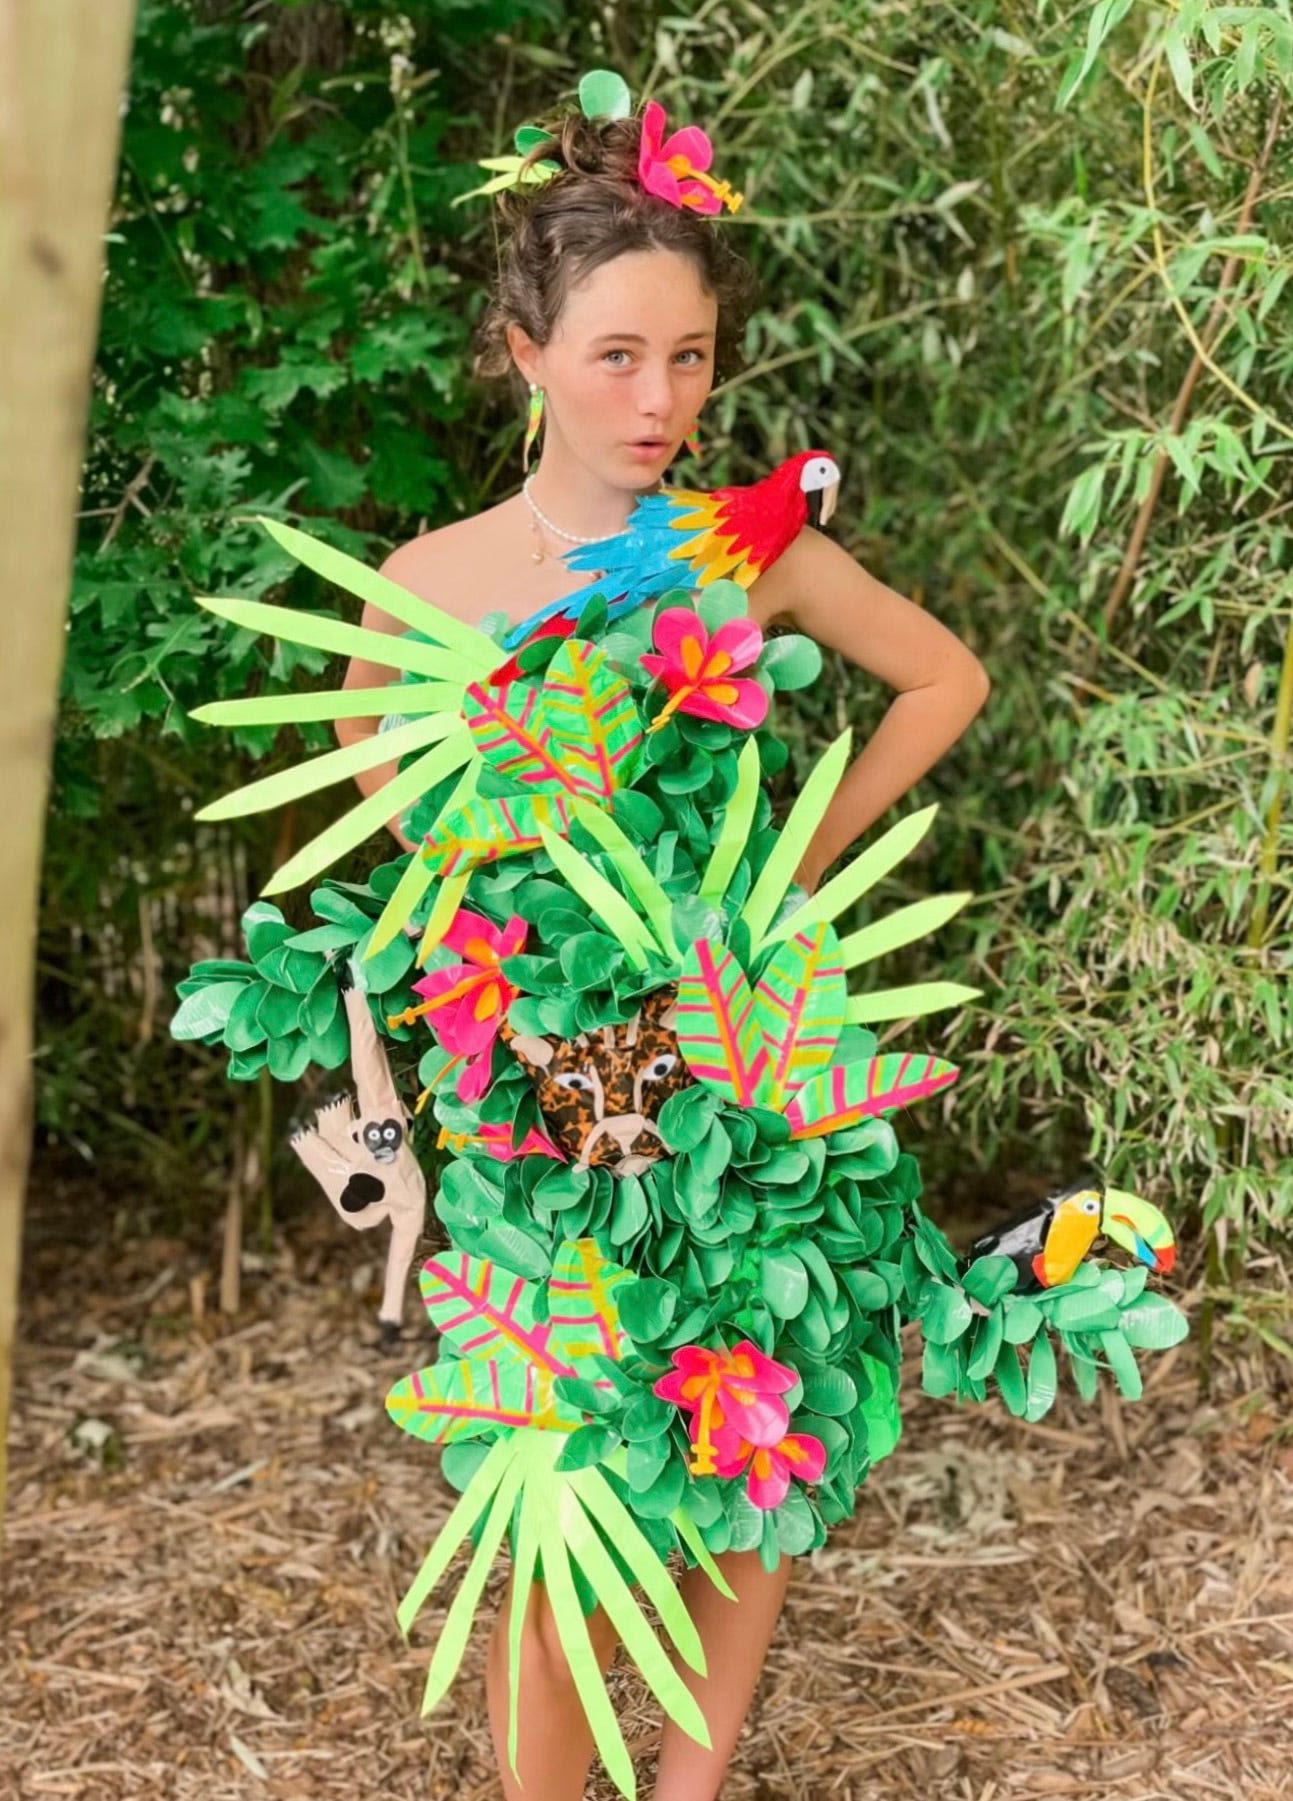 Arts news: Edmond teen crafts Duck Tape prom dress for chance at scholarship